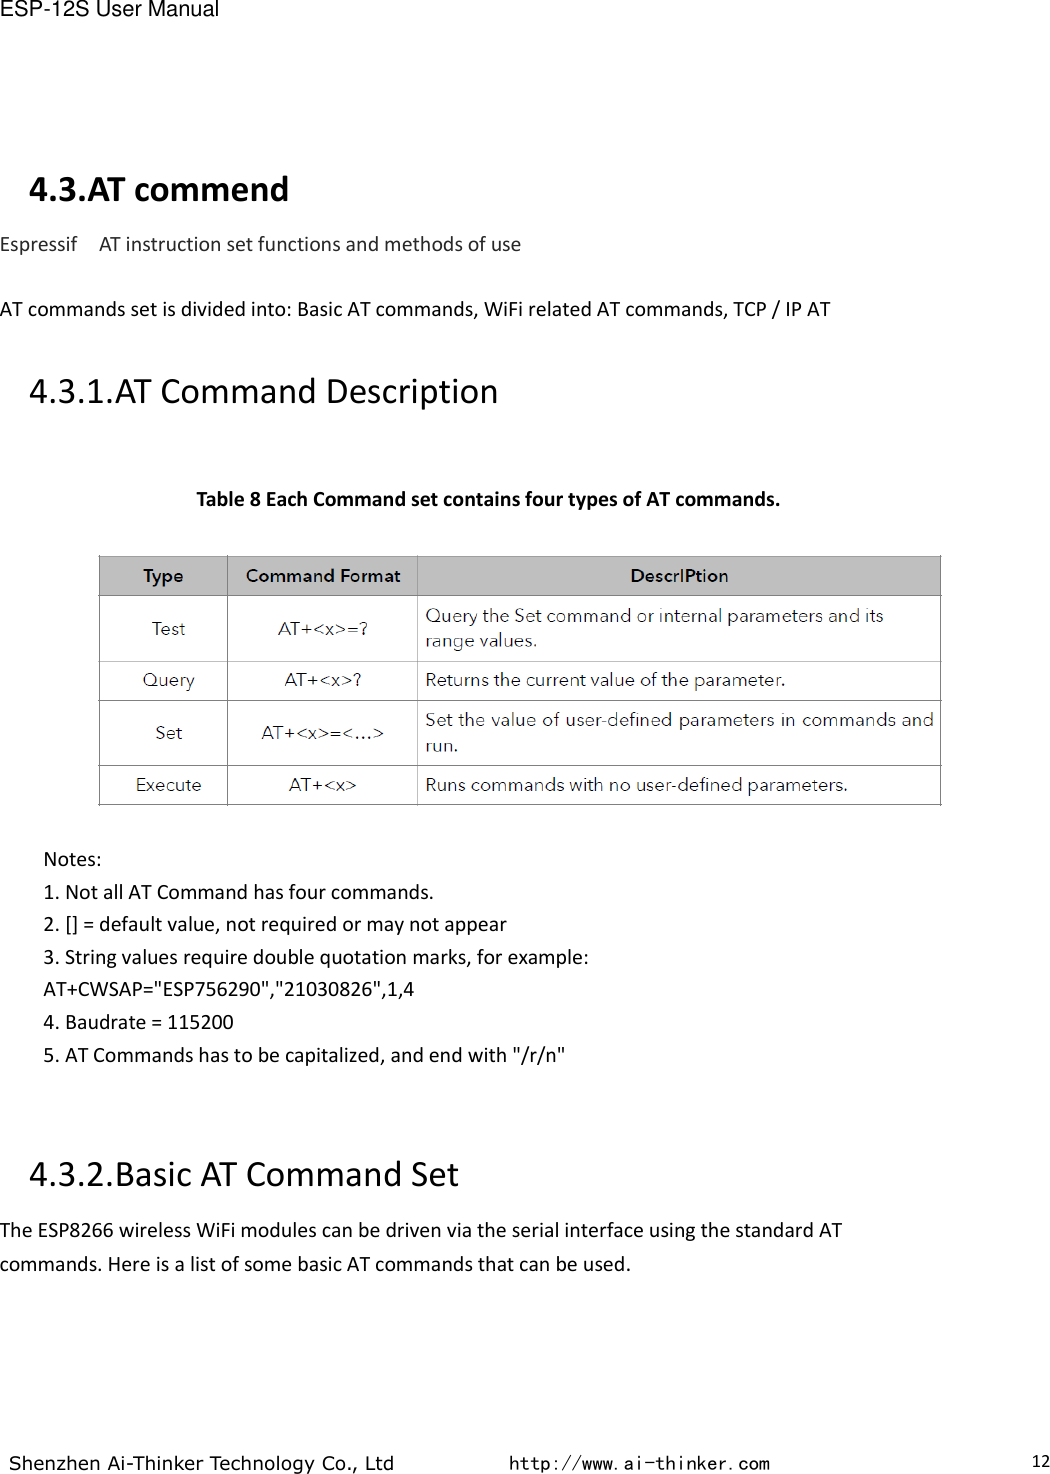 ESP-12S User Manual  Shenzhen Ai-Thinker Technology Co., Ltd           http://www.ai-thinker.com                                                                                     12 4.3.AT commend Espressif    AT instruction set functions and methods of use  AT commands set is divided into: Basic AT commands, WiFi related AT commands, TCP / IP AT  4.3.1.AT Command Description  Table 8 Each Command set contains four types of AT commands.  Notes: 1. Not all AT Command has four commands. 2. [] = default value, not required or may not appear 3. String values require double quotation marks, for example: AT+CWSAP=&quot;ESP756290&quot;,&quot;21030826&quot;,1,4 4. Baudrate = 115200 5. AT Commands has to be capitalized, and end with &quot;/r/n&quot;  4.3.2.Basic AT Command Set The ESP8266 wireless WiFi modules can be driven via the serial interface using the standard AT commands. Here is a list of some basic AT commands that can be used.            